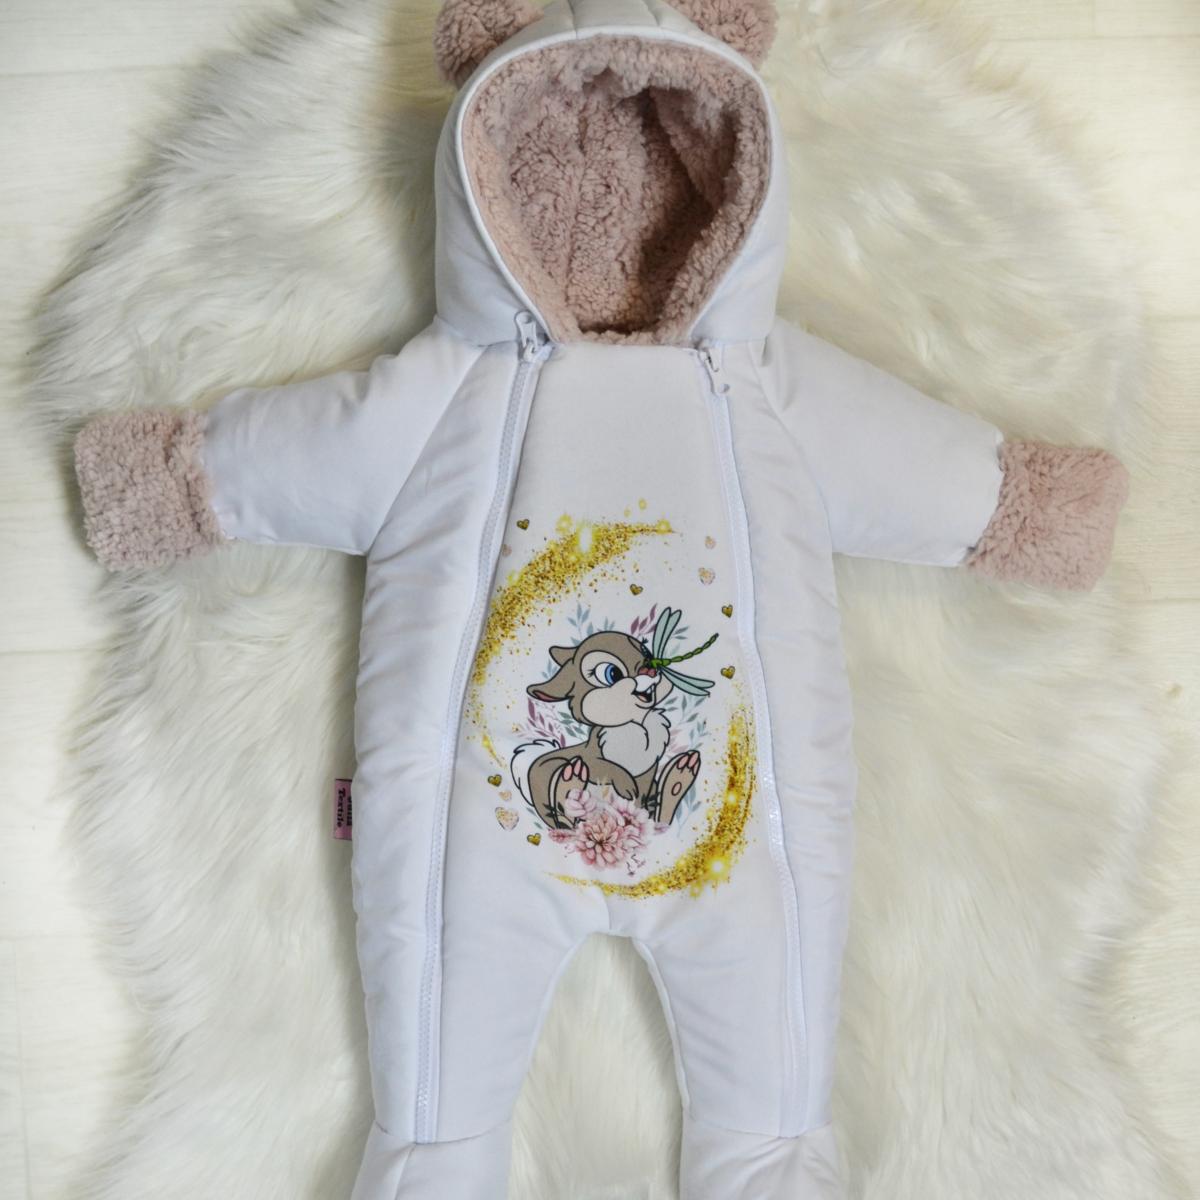 Winter onesie with bunny graphics with pink white butterfly